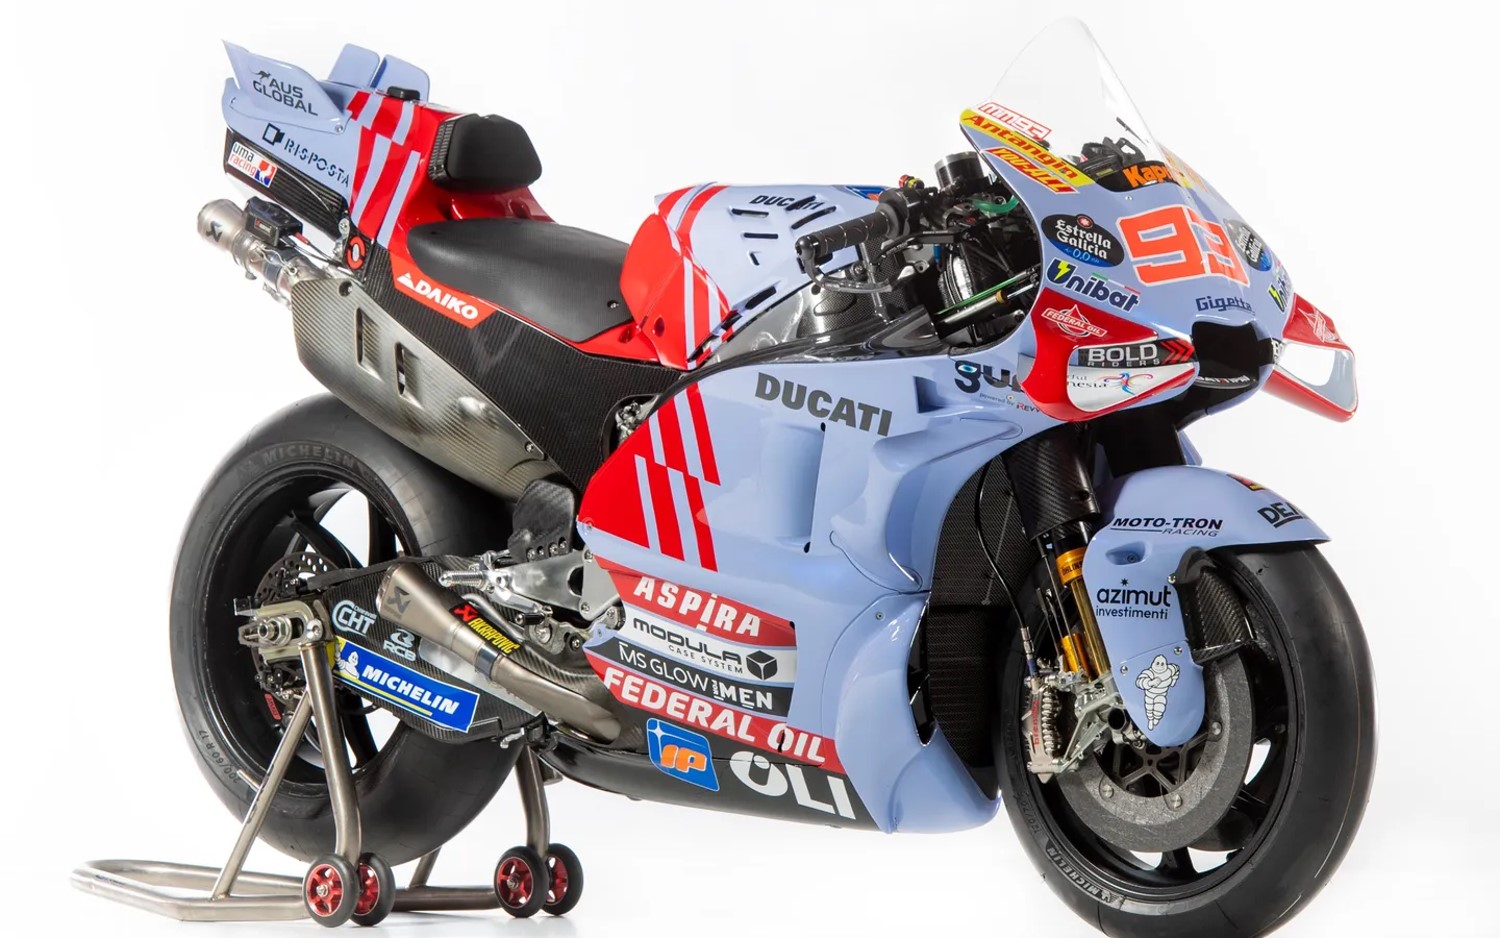 A Gresini Ducati Desmosedici with Marc Marquez's #93 on the fairing. Image: Supplied by Gresini Racing